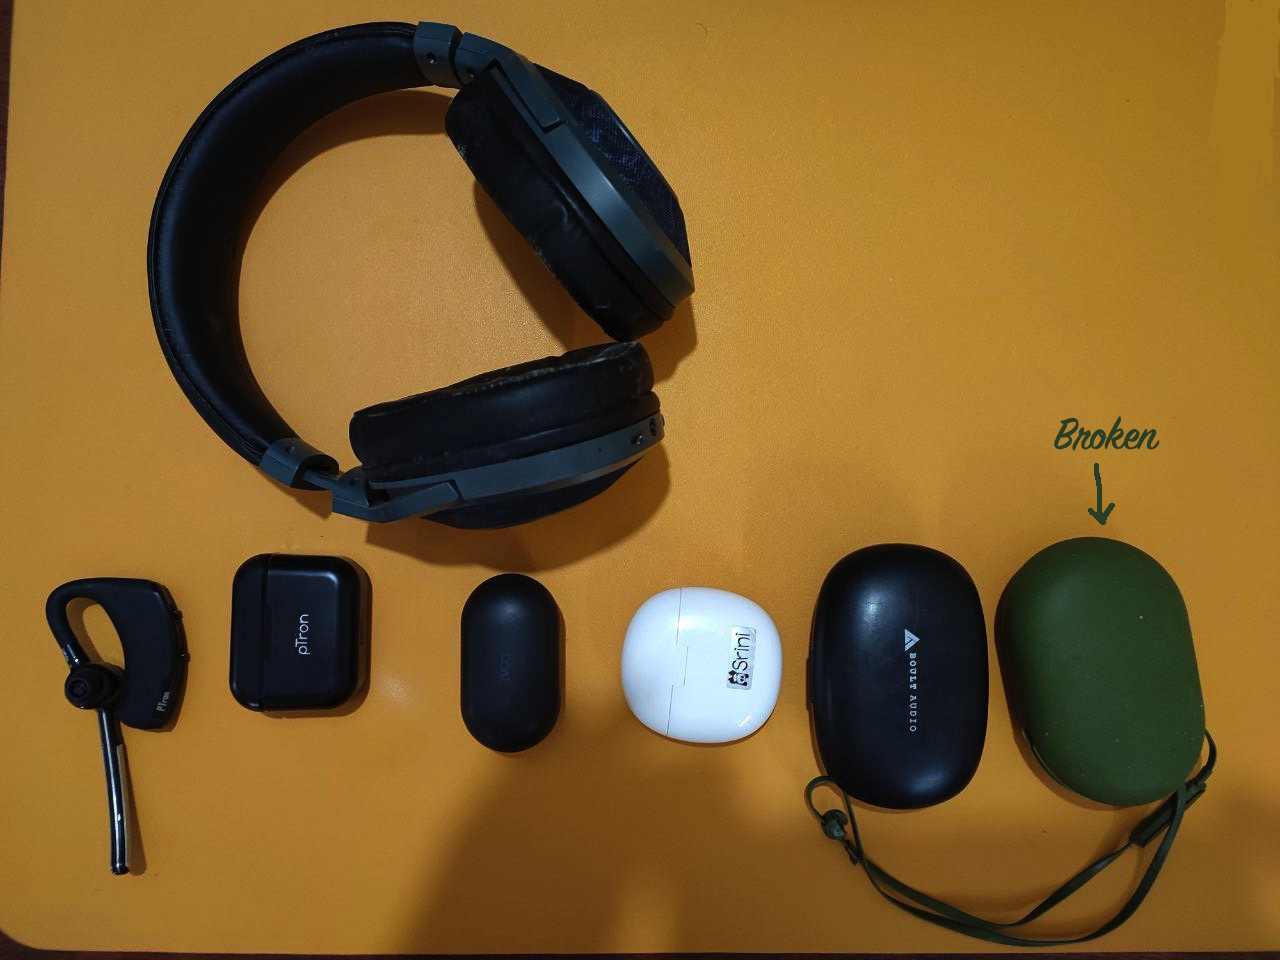 My set of bluetooth headsets